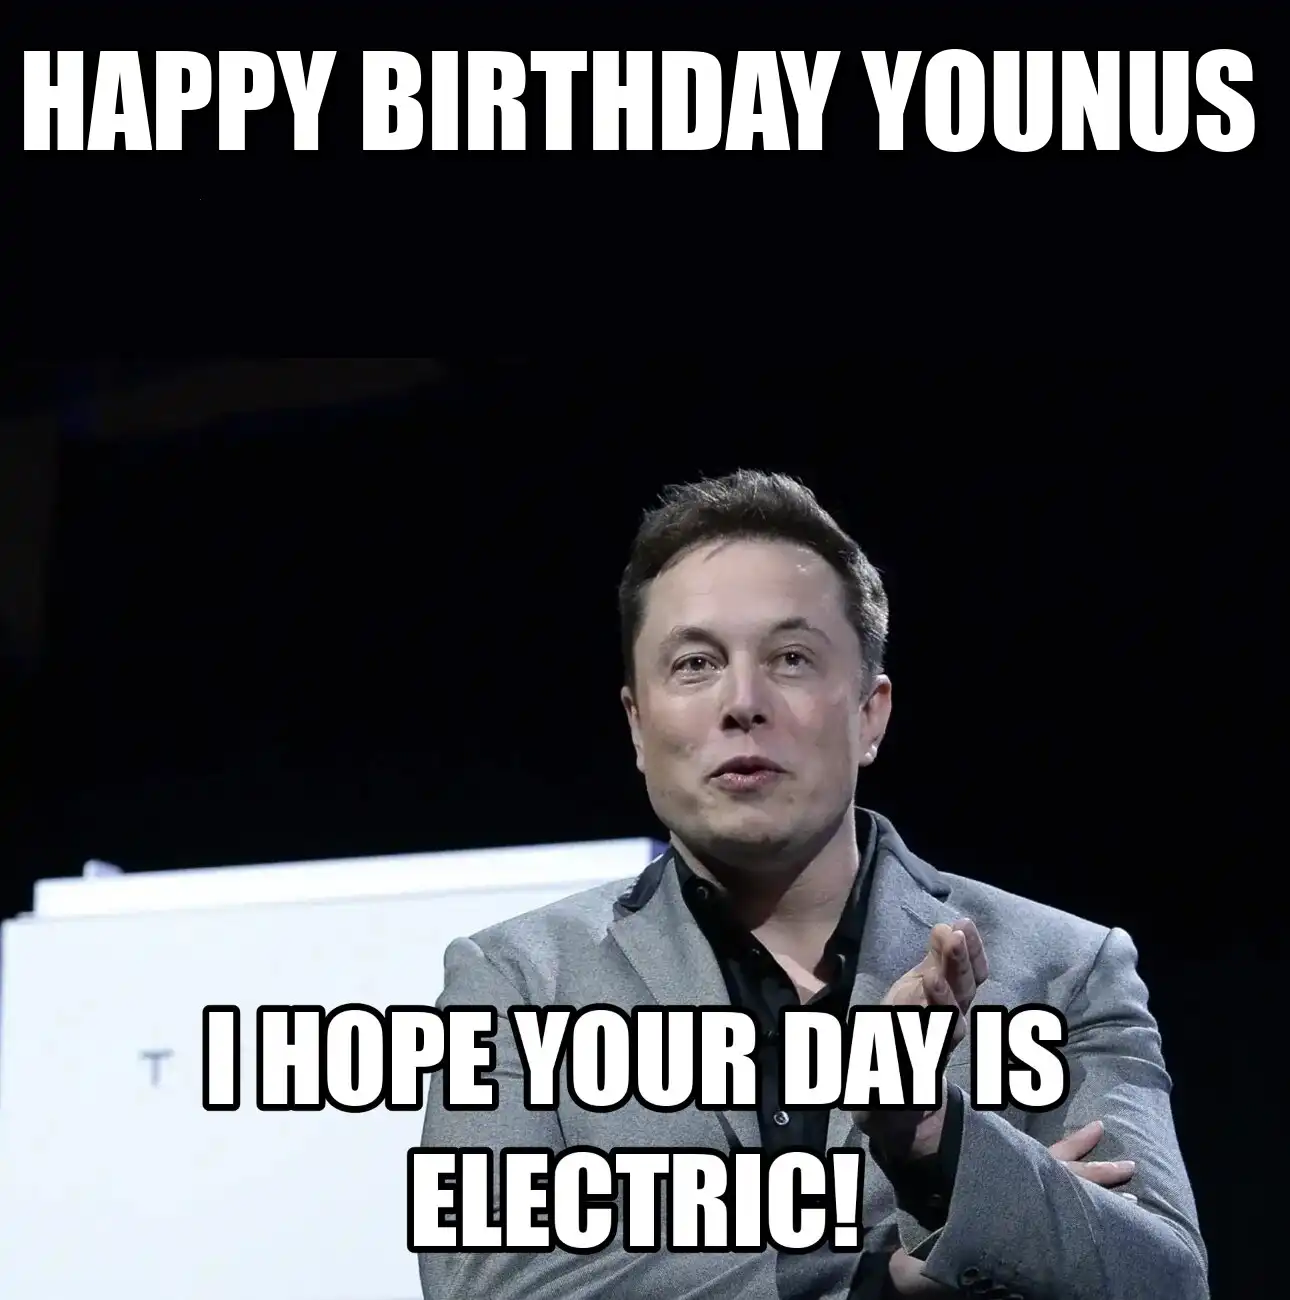 Happy Birthday Younus I Hope Your Day Is Electric Meme